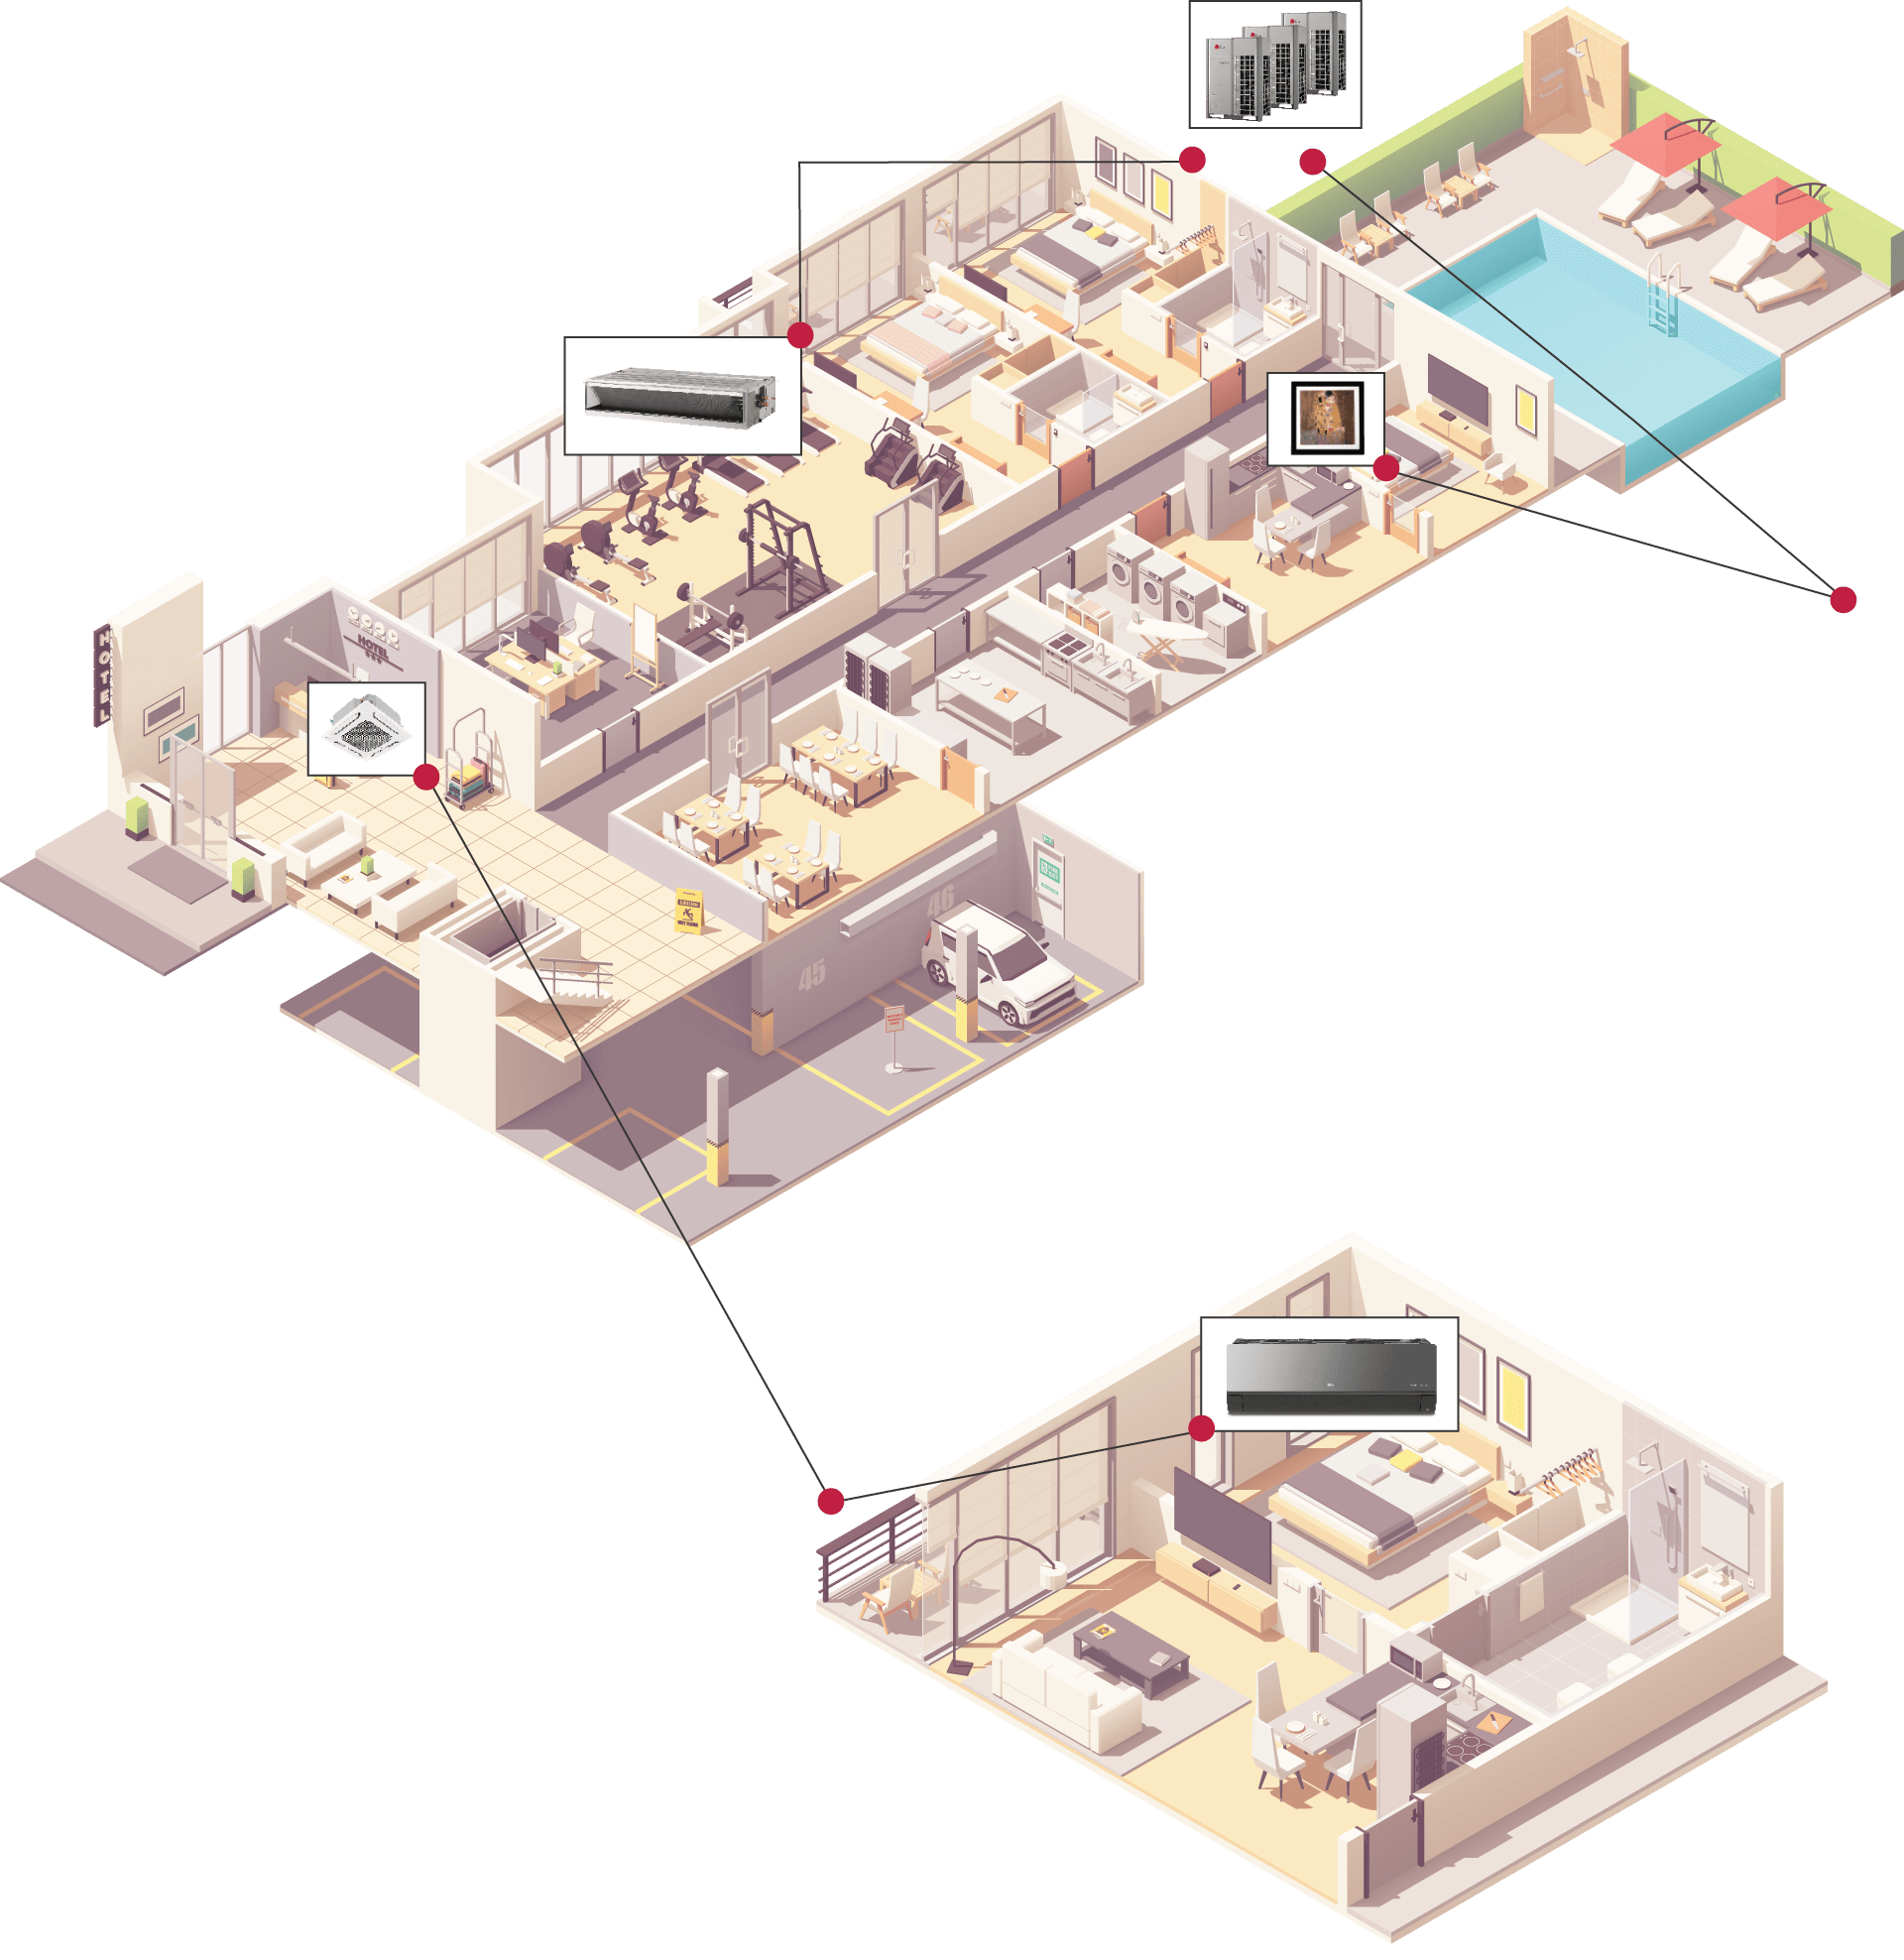 Illustrated cross-section of one hotel level, including lobby, sleeping and exercise areas